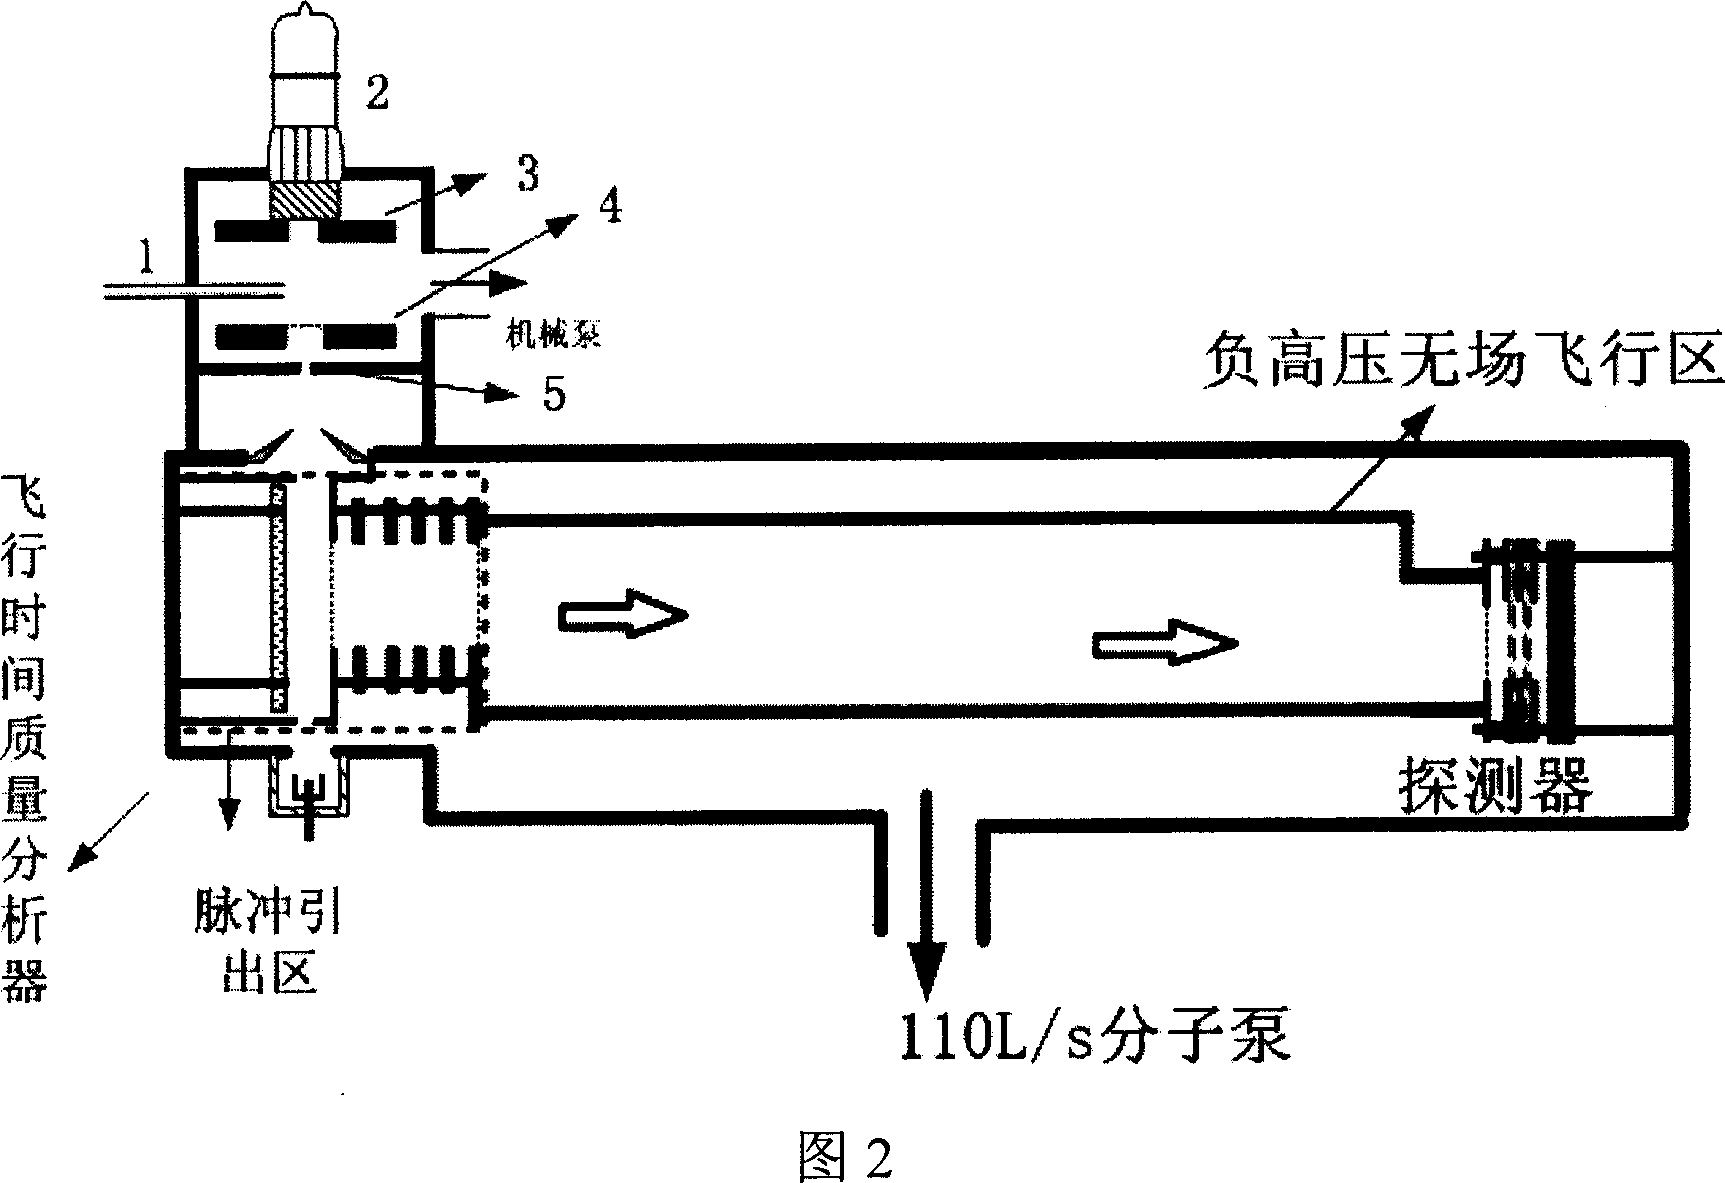 Vacuumeultraviolet lamp ionization device in time-of-flight mass spectrometer